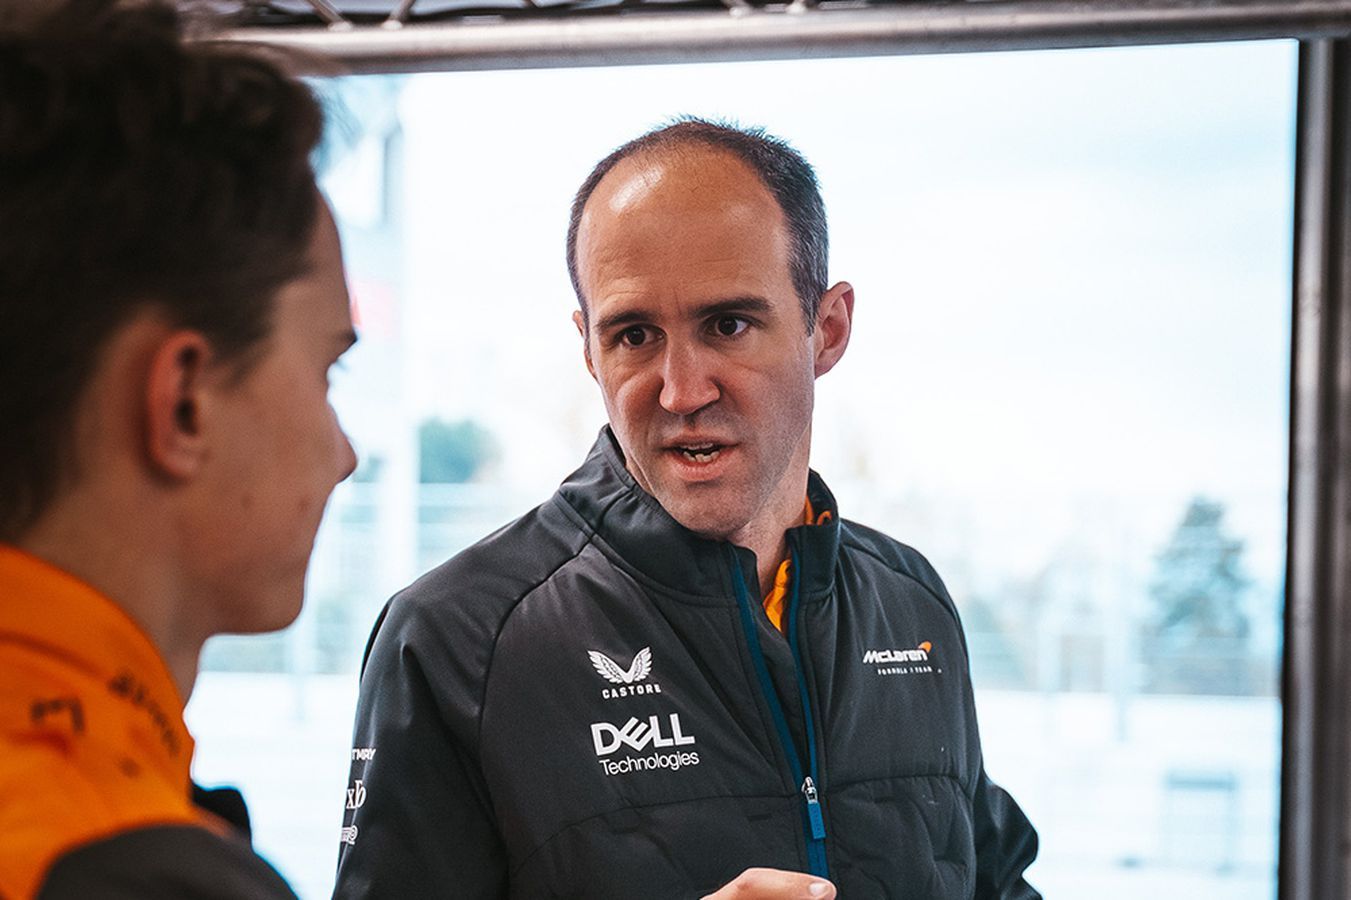 Piastri's Race Engineer Tom Stallard was among those working with him in Barcelona